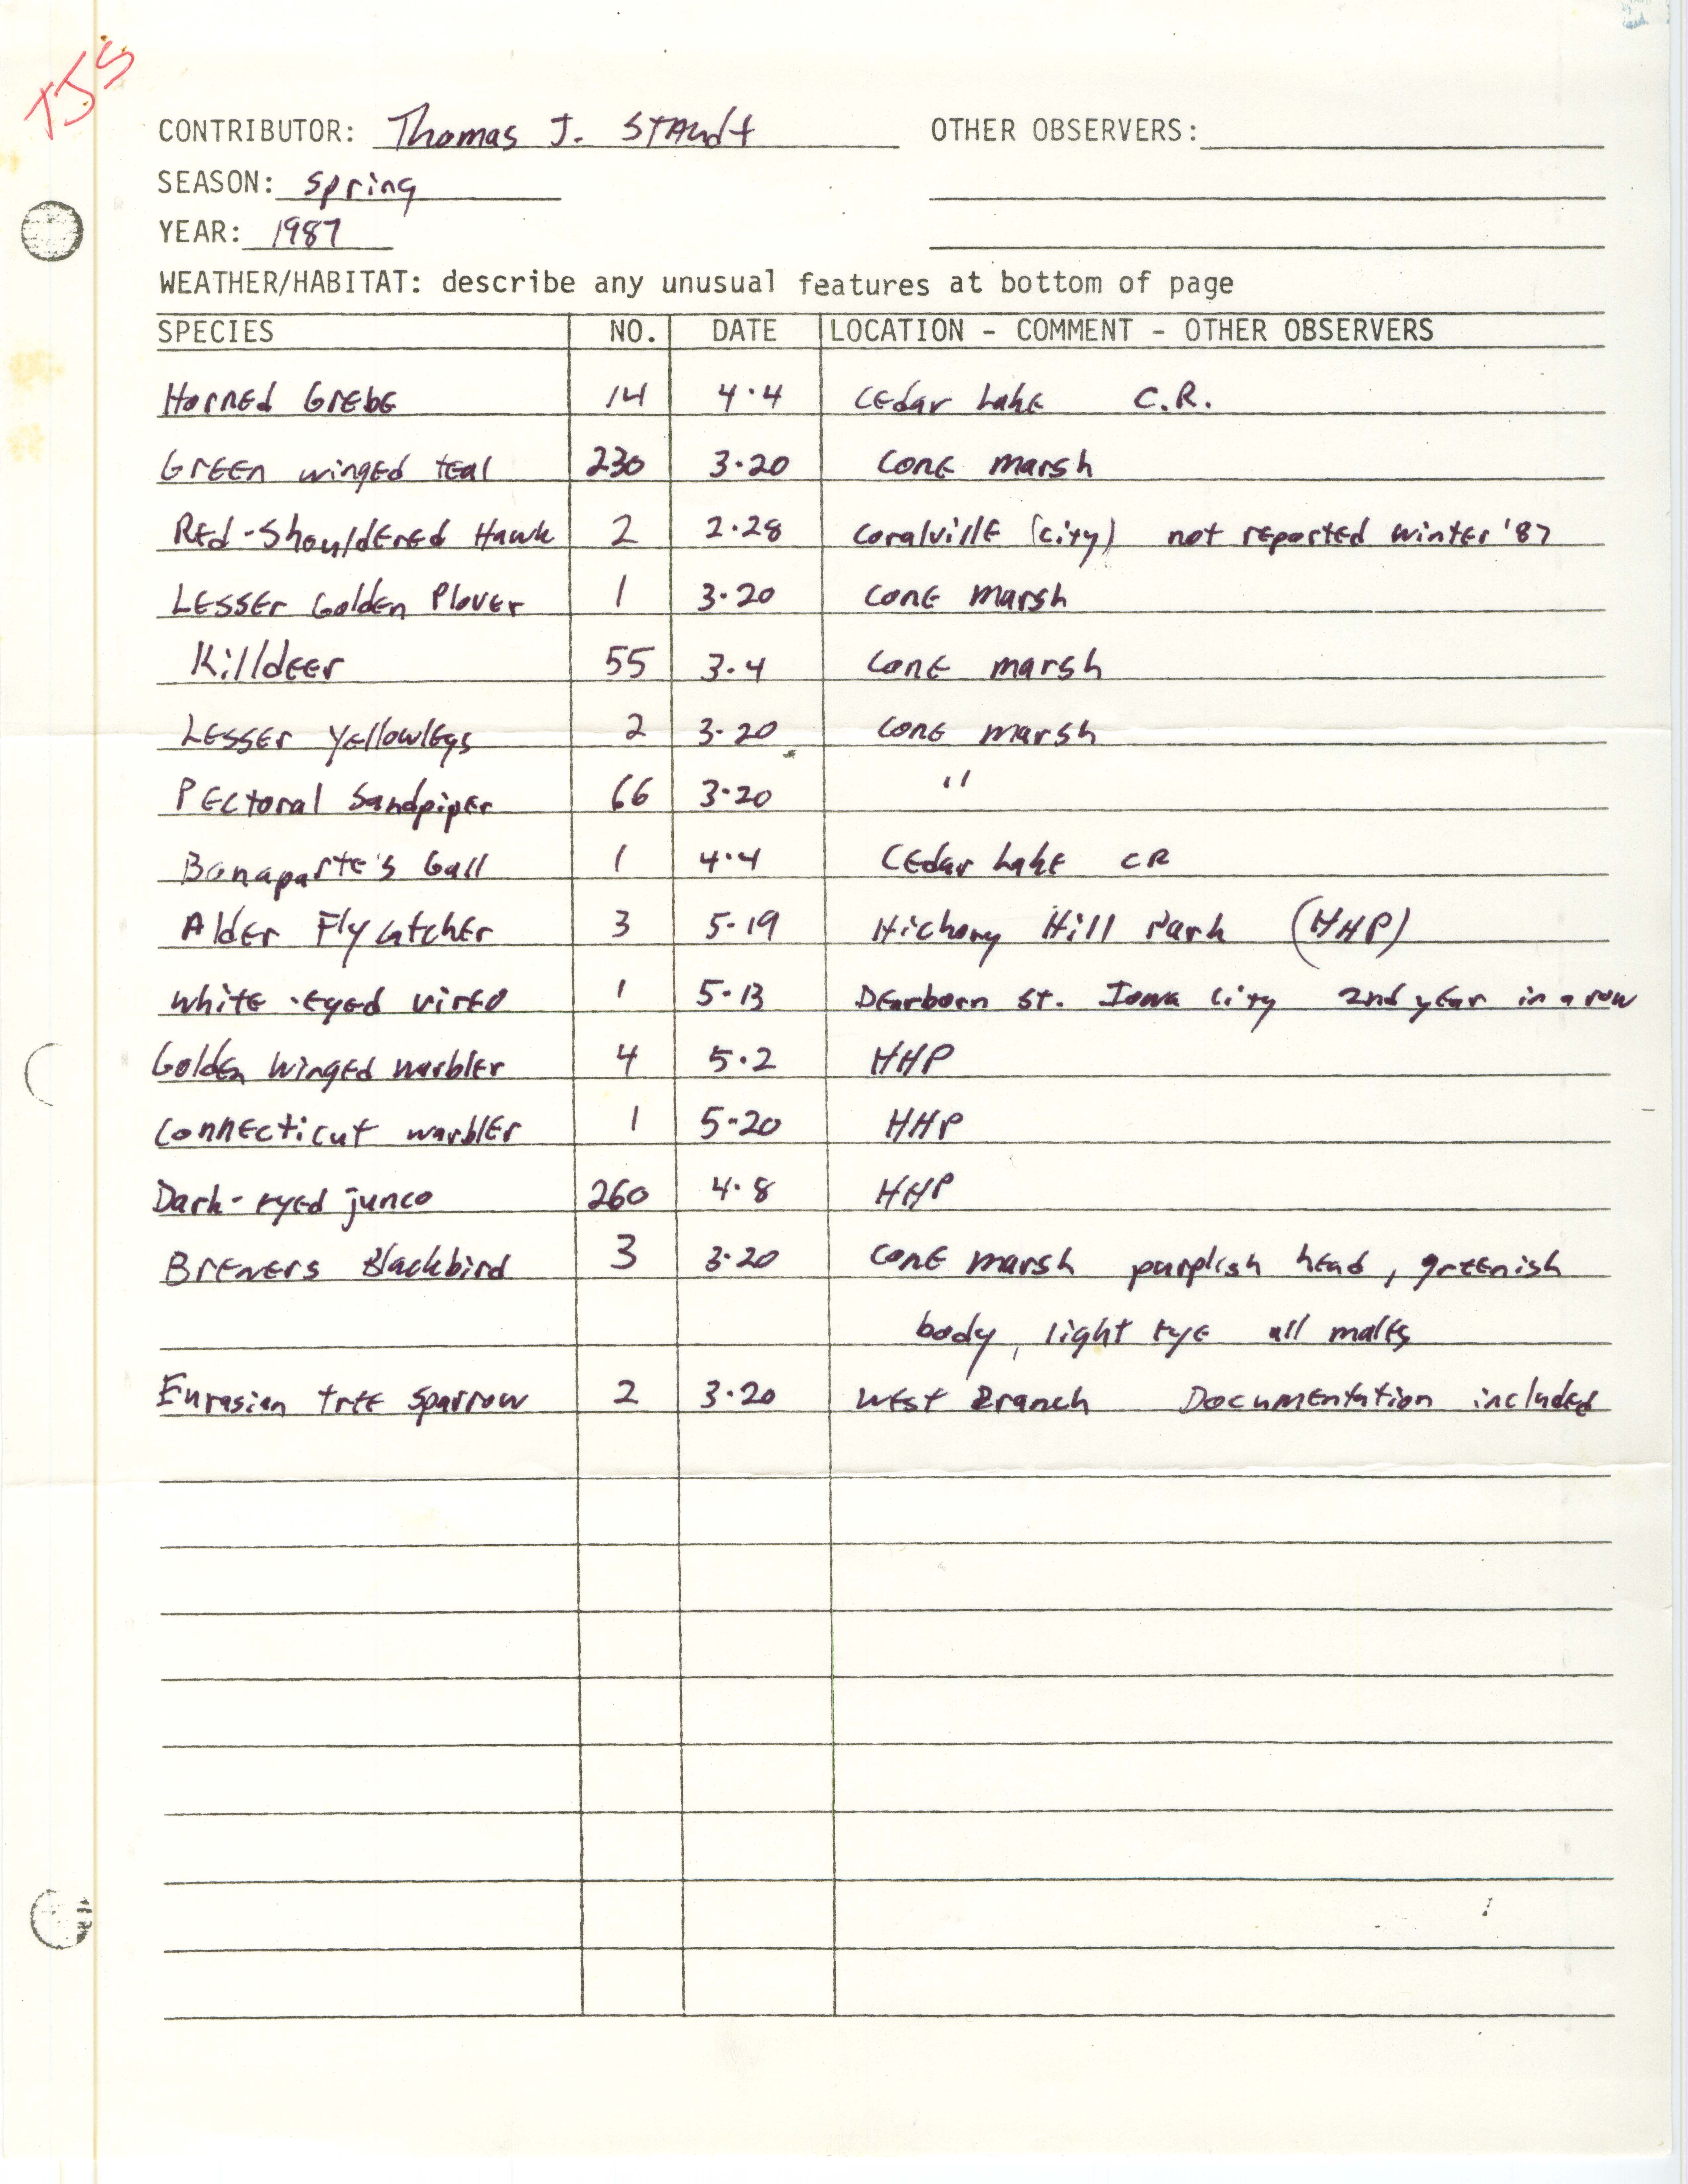 Field notes contributed by Thomas J. Staudt, spring 1987